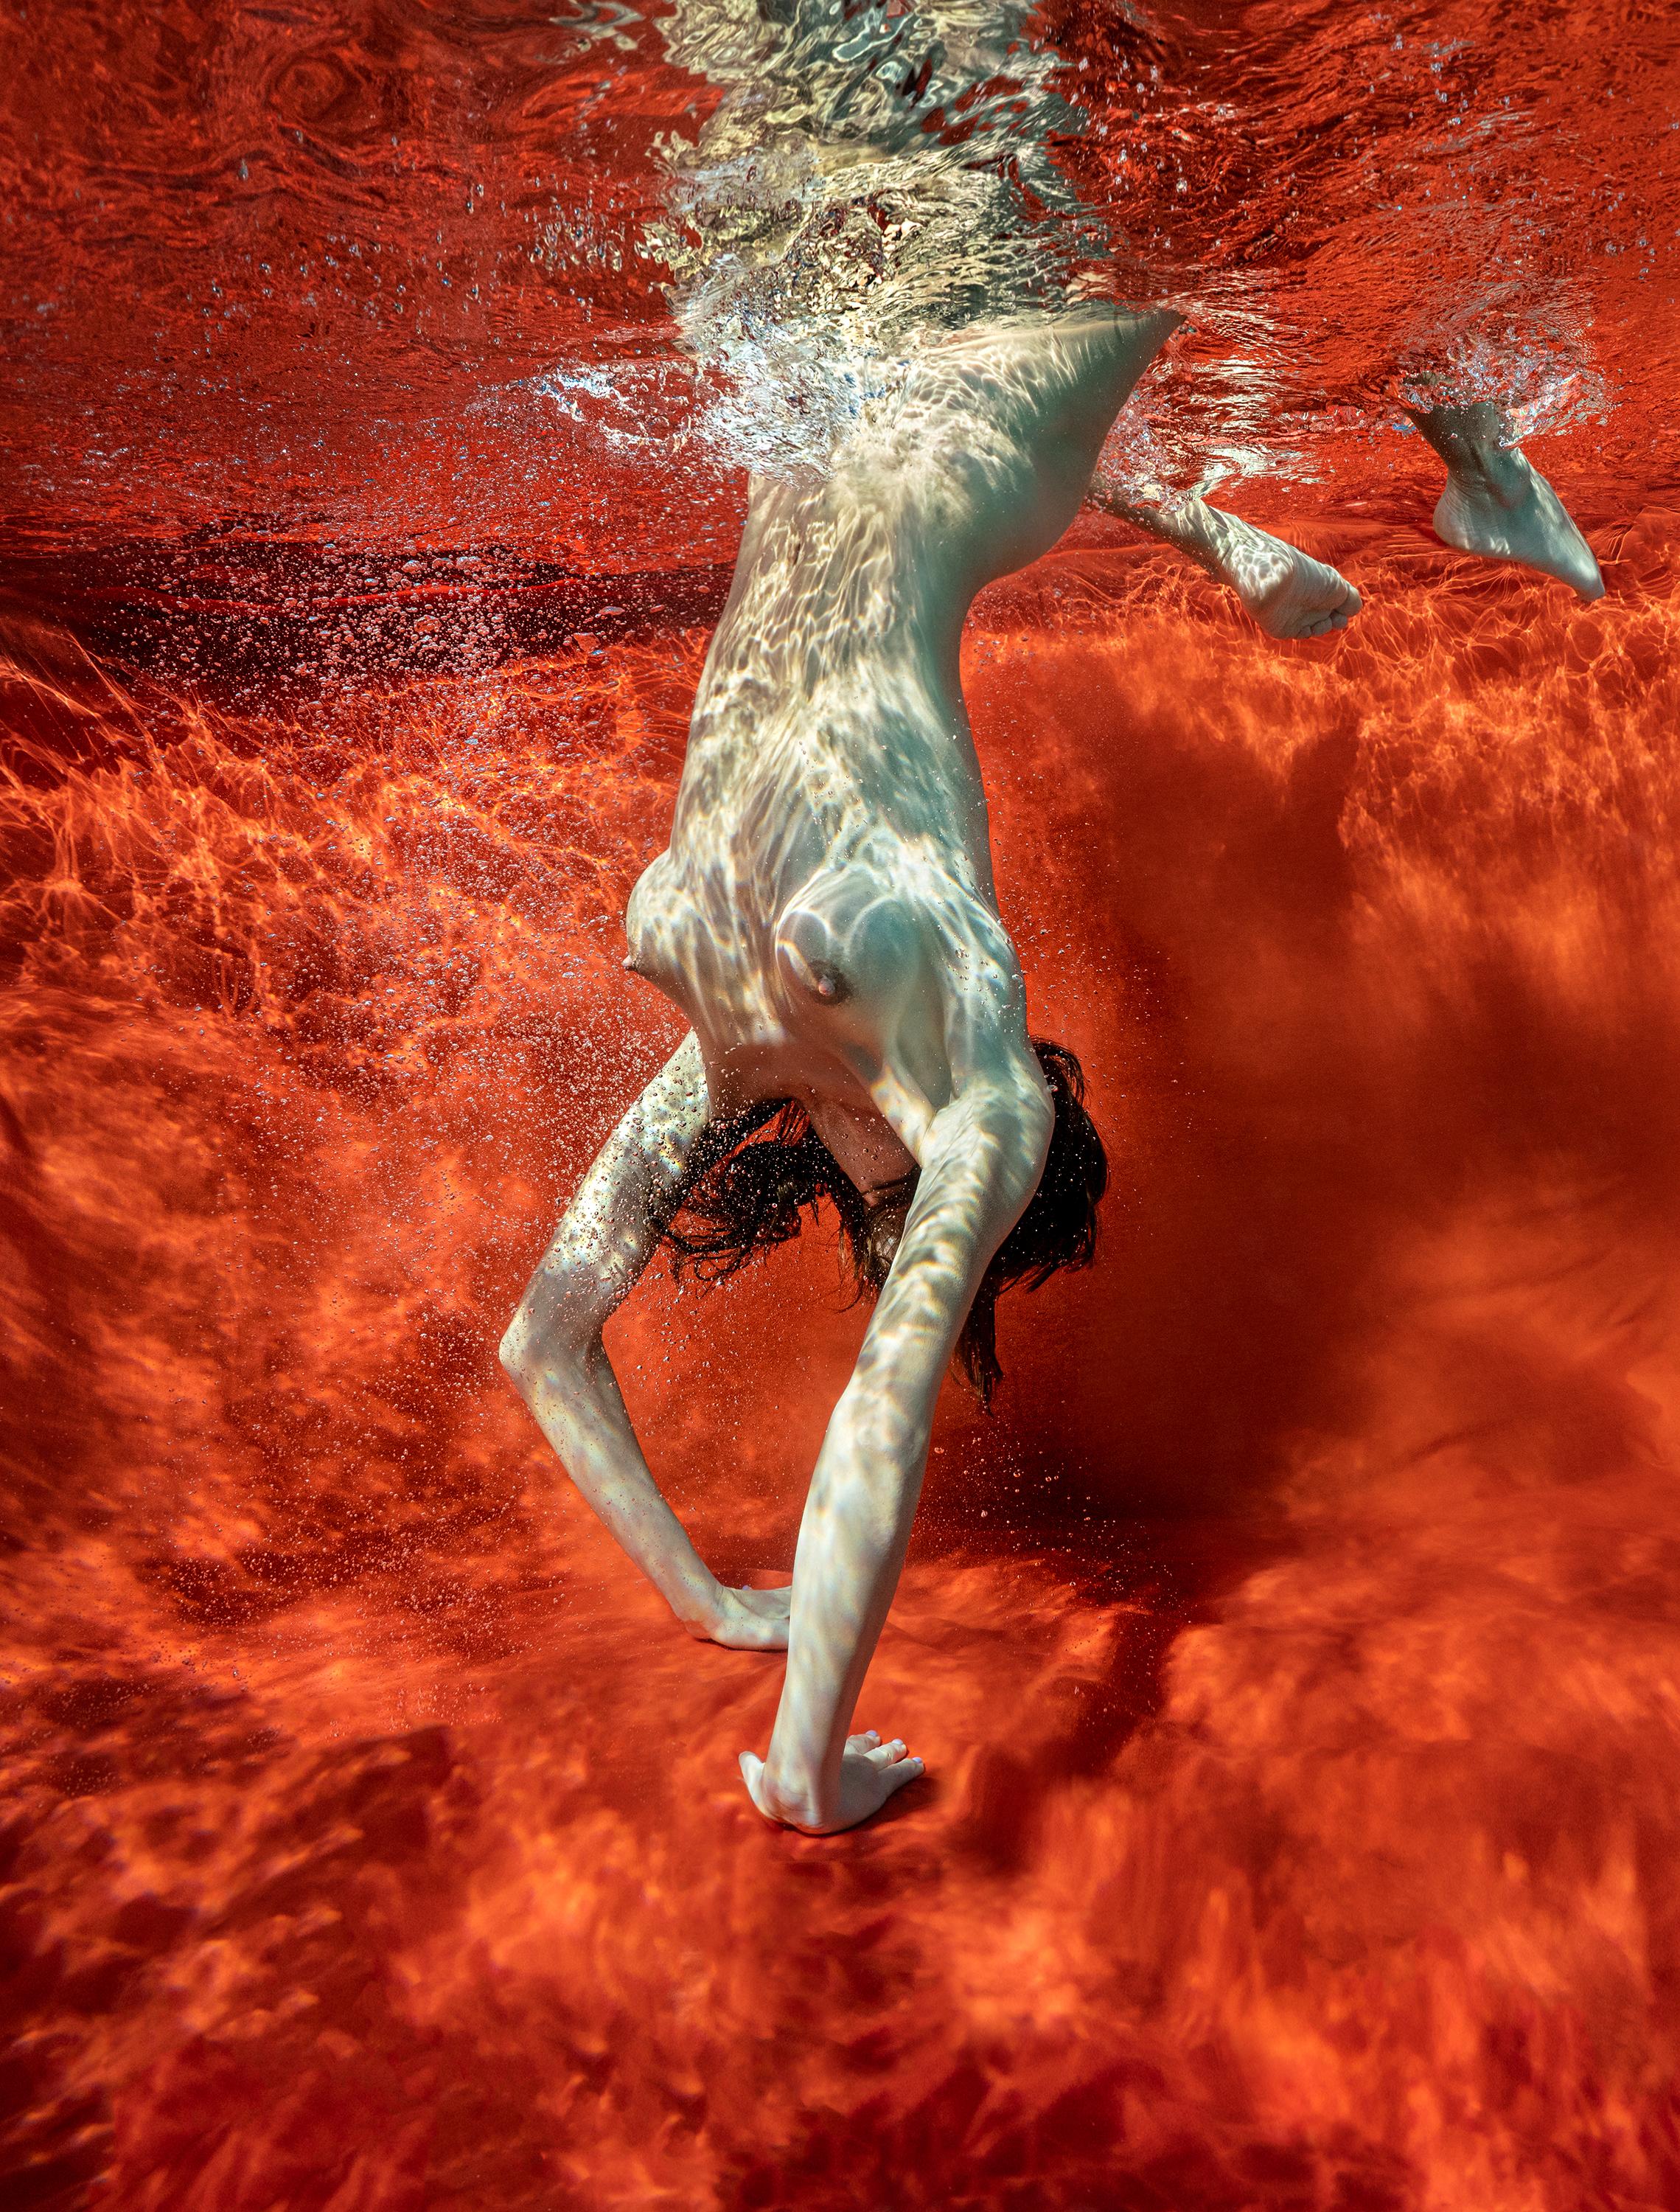 Alex Sher Nude Photograph - Blood and Milk VIII - underwater nude photograph - archival pigment print 57x43"